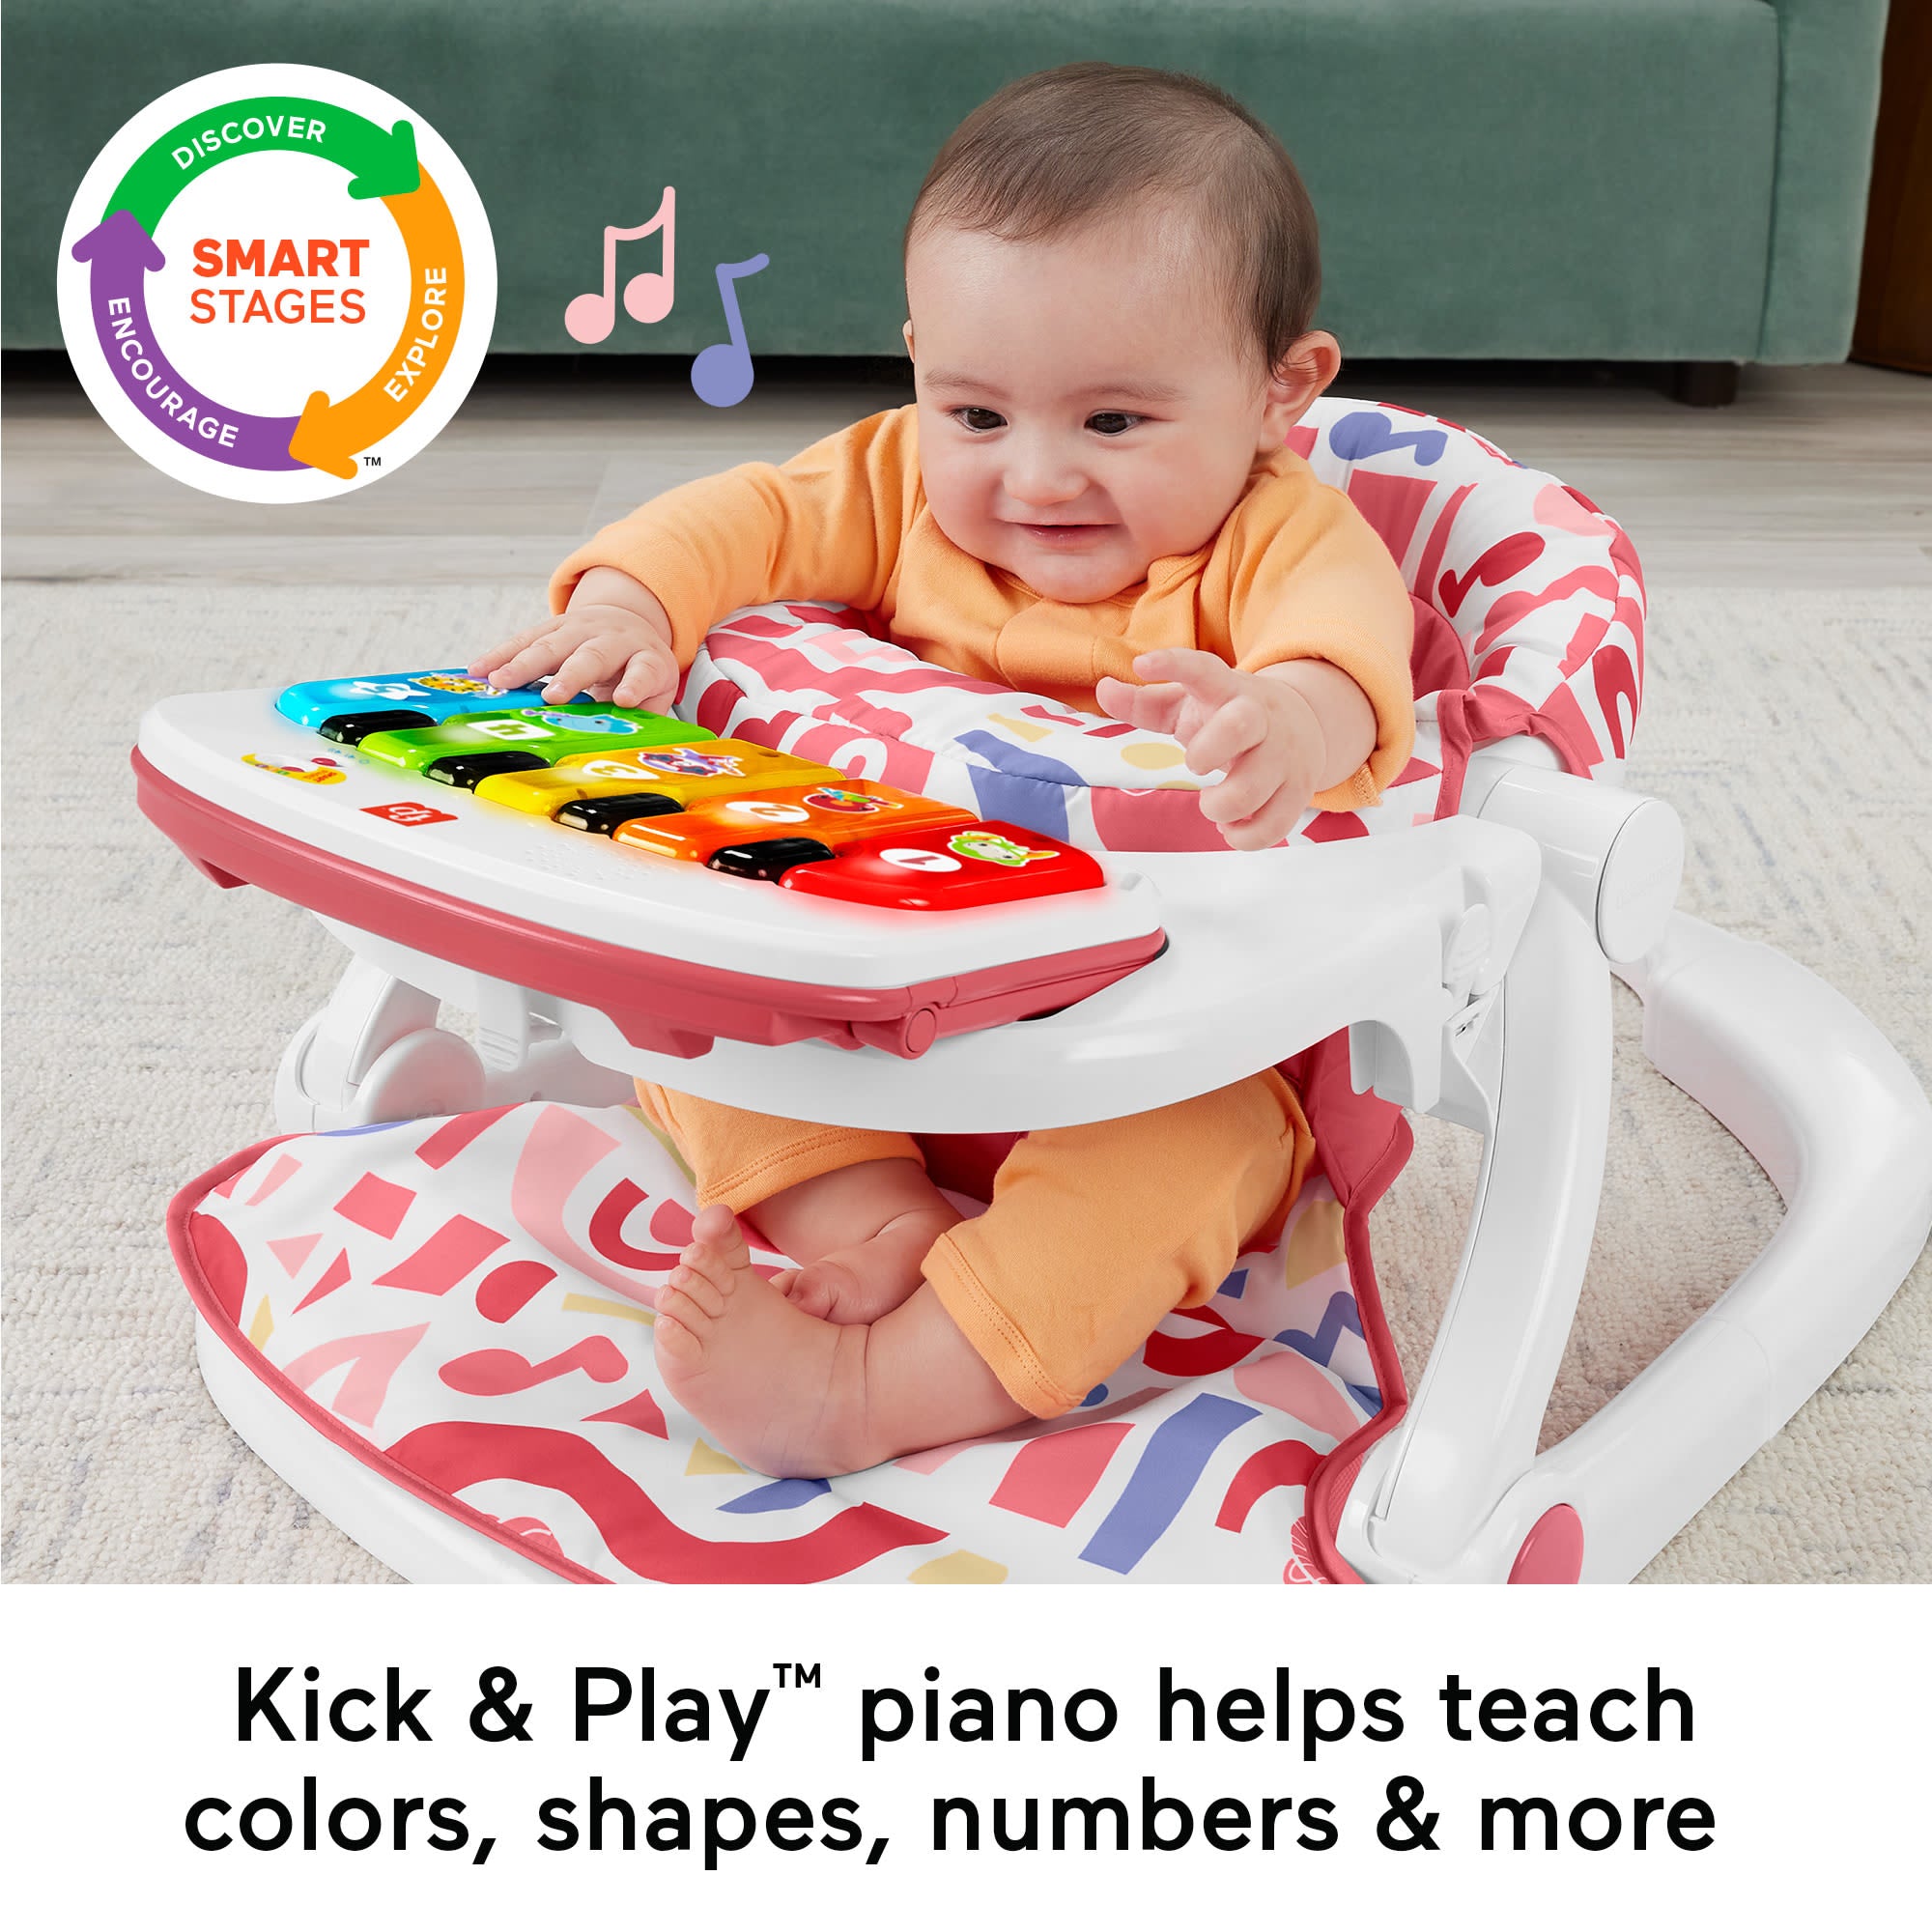 Fisher-Price Kick & Play Deluxe Sit-Me-Up Seat | MATTEL